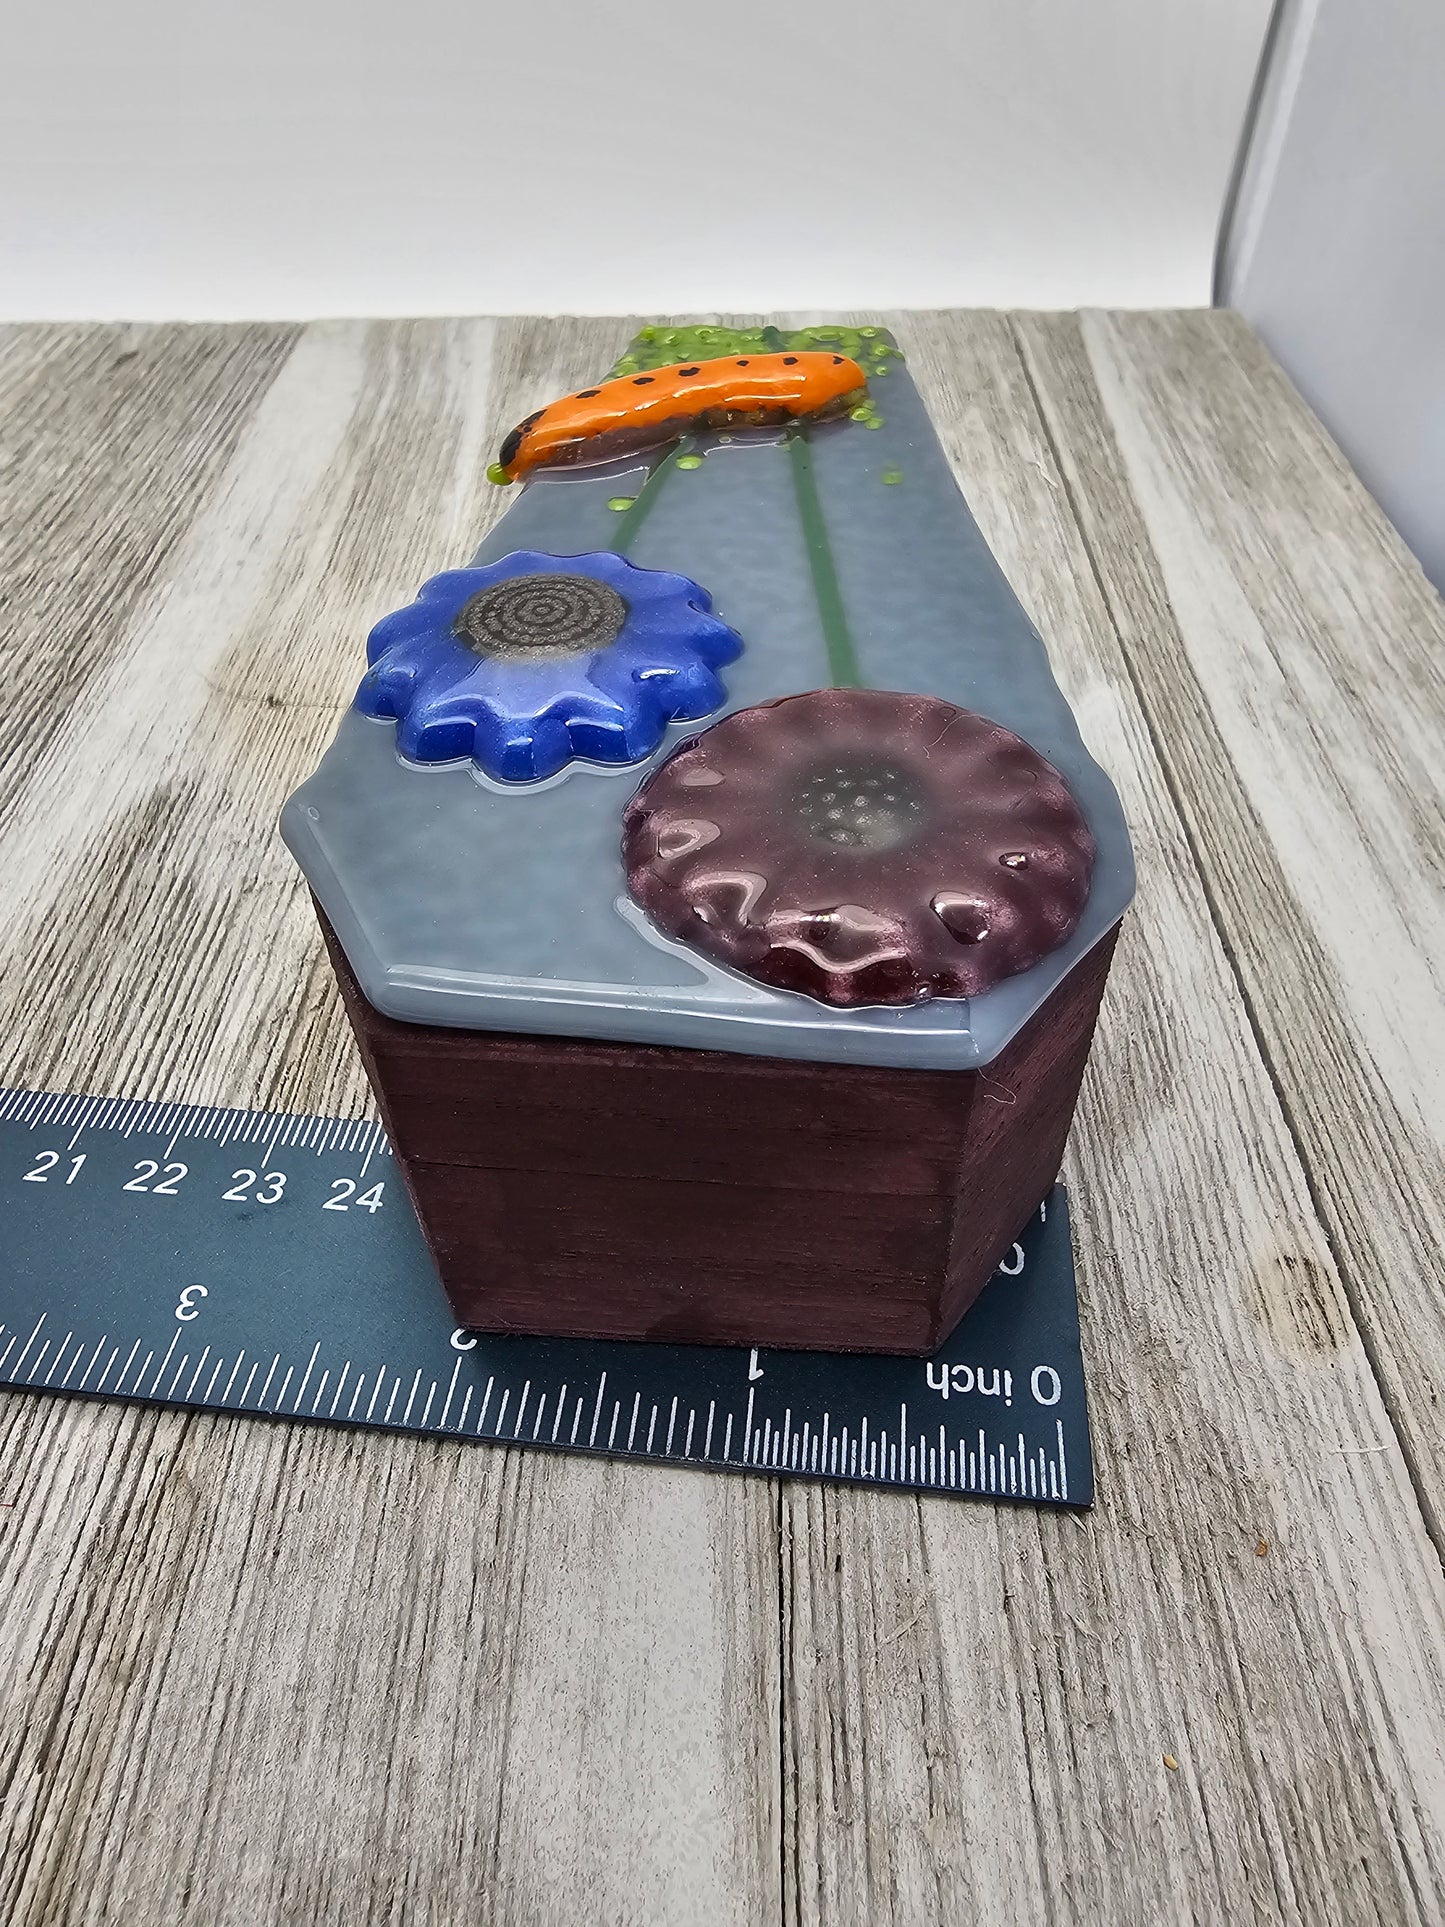 Wooden Coffin Trinket Box with Fused Glass Lid, Flowers